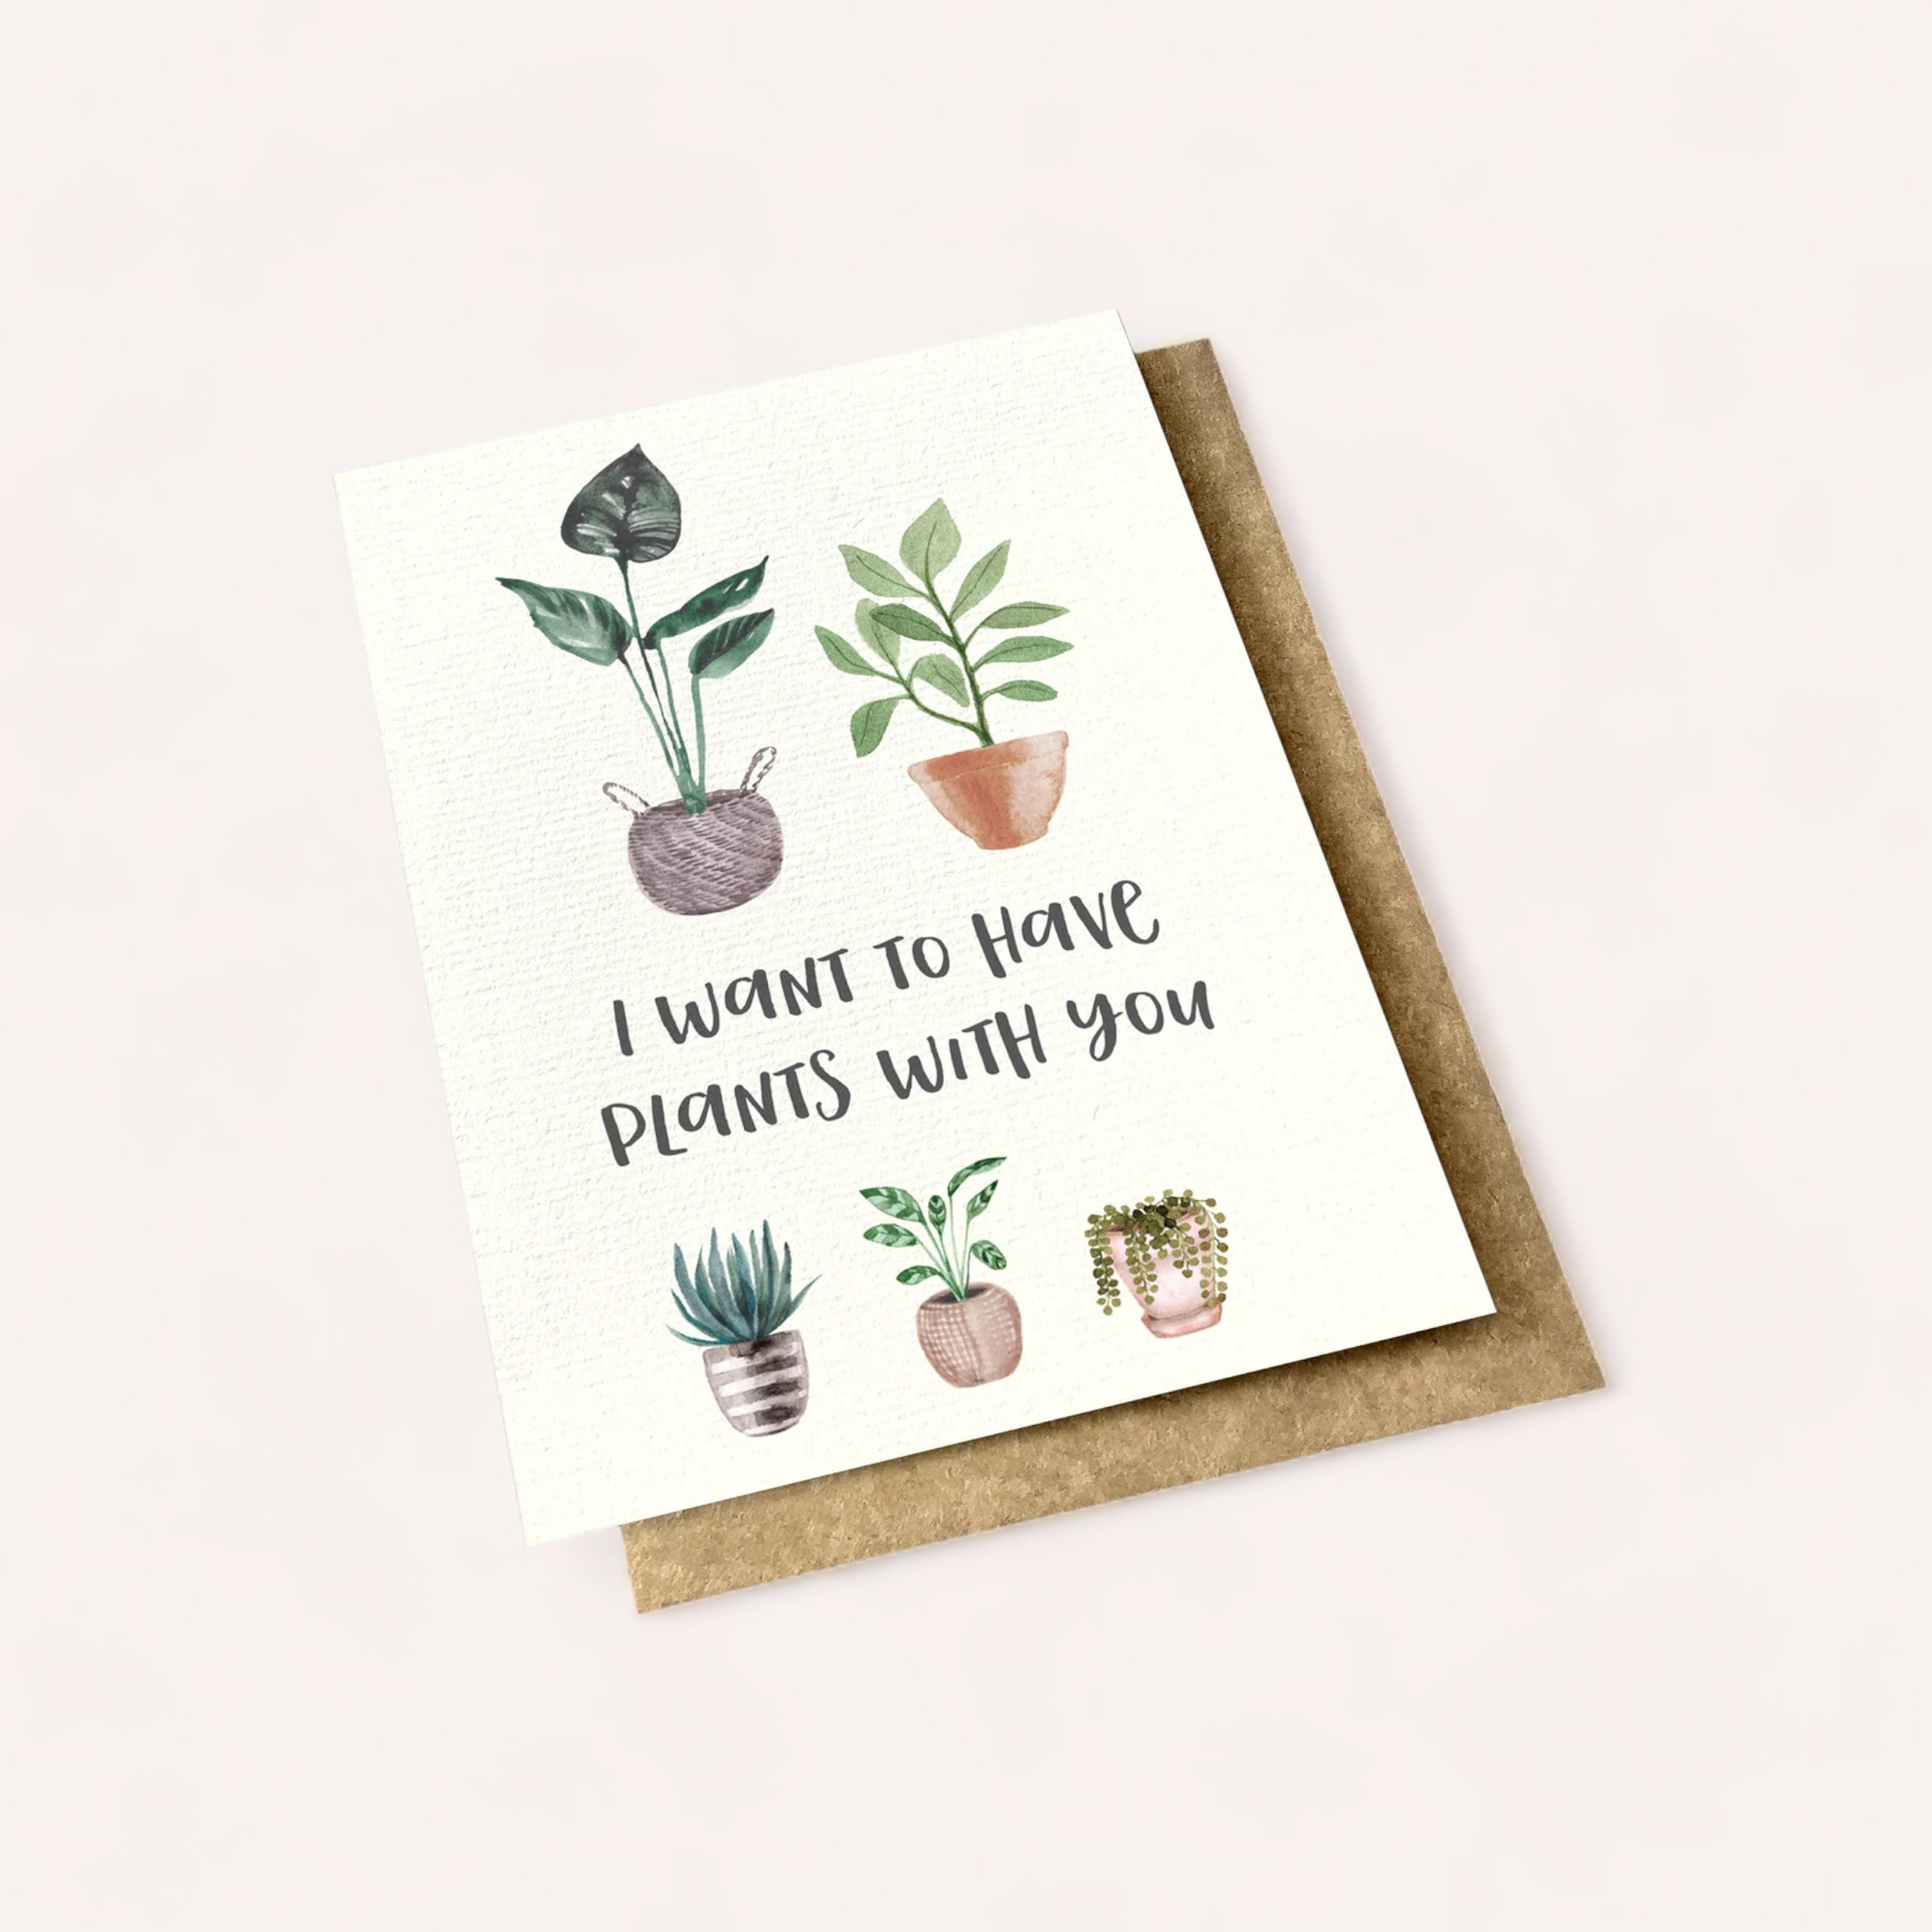 A charming greeting card, a proud Product of New Zealand, features the punny phrase "i want to have plants with you" surrounded by watercolor illustrations of various potted plants, presented with an I want to have Plants With You Card by Ink Bomb.